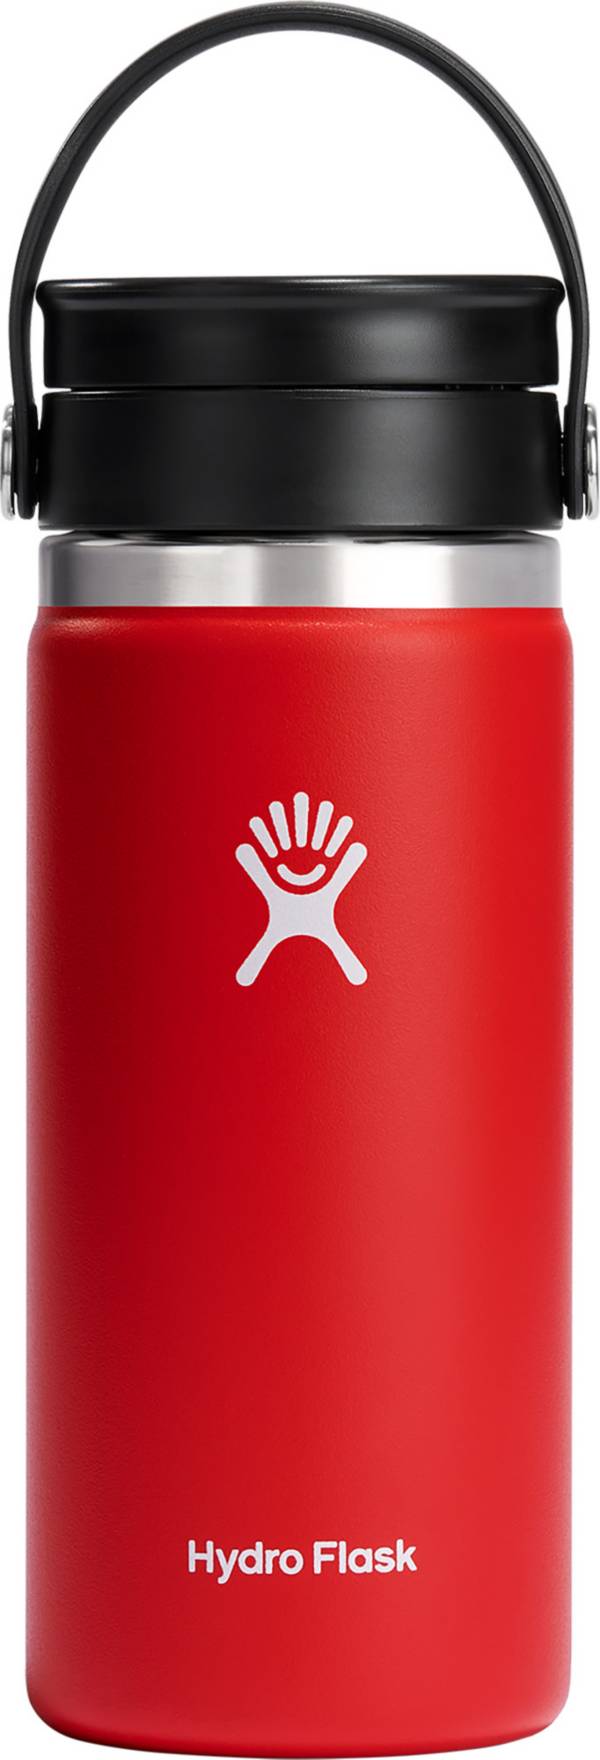 Hydro Flask Wide Mouth Coffee with Flex Sip Lid 16oz Stone